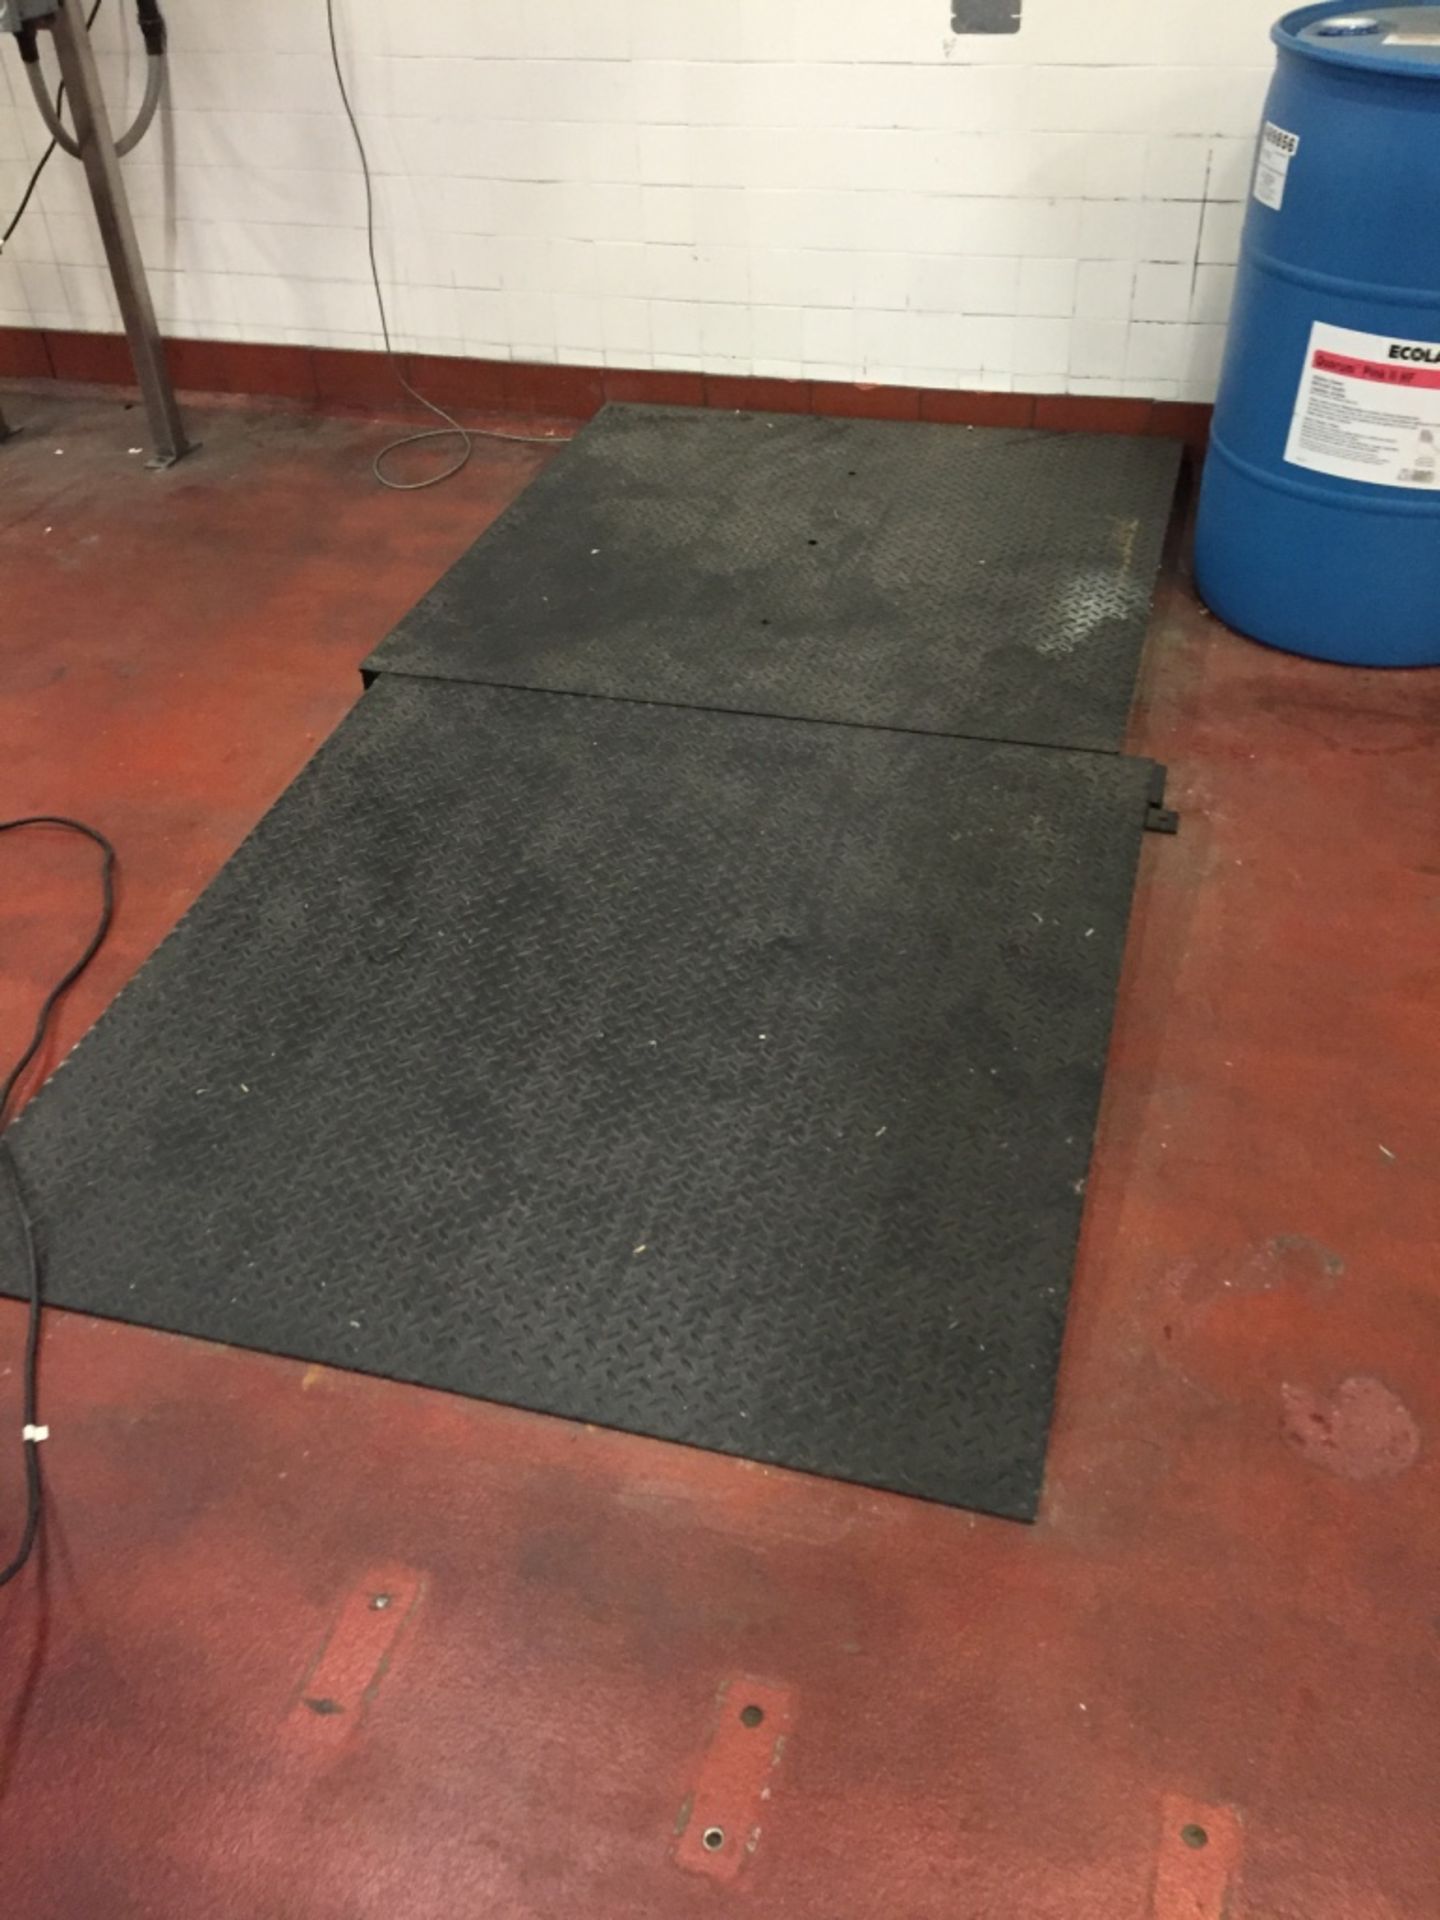 Defender 3000 XtremeW Floor Scale - Rigging Fee $100, If Crating or Lumber is Needed Add Additional